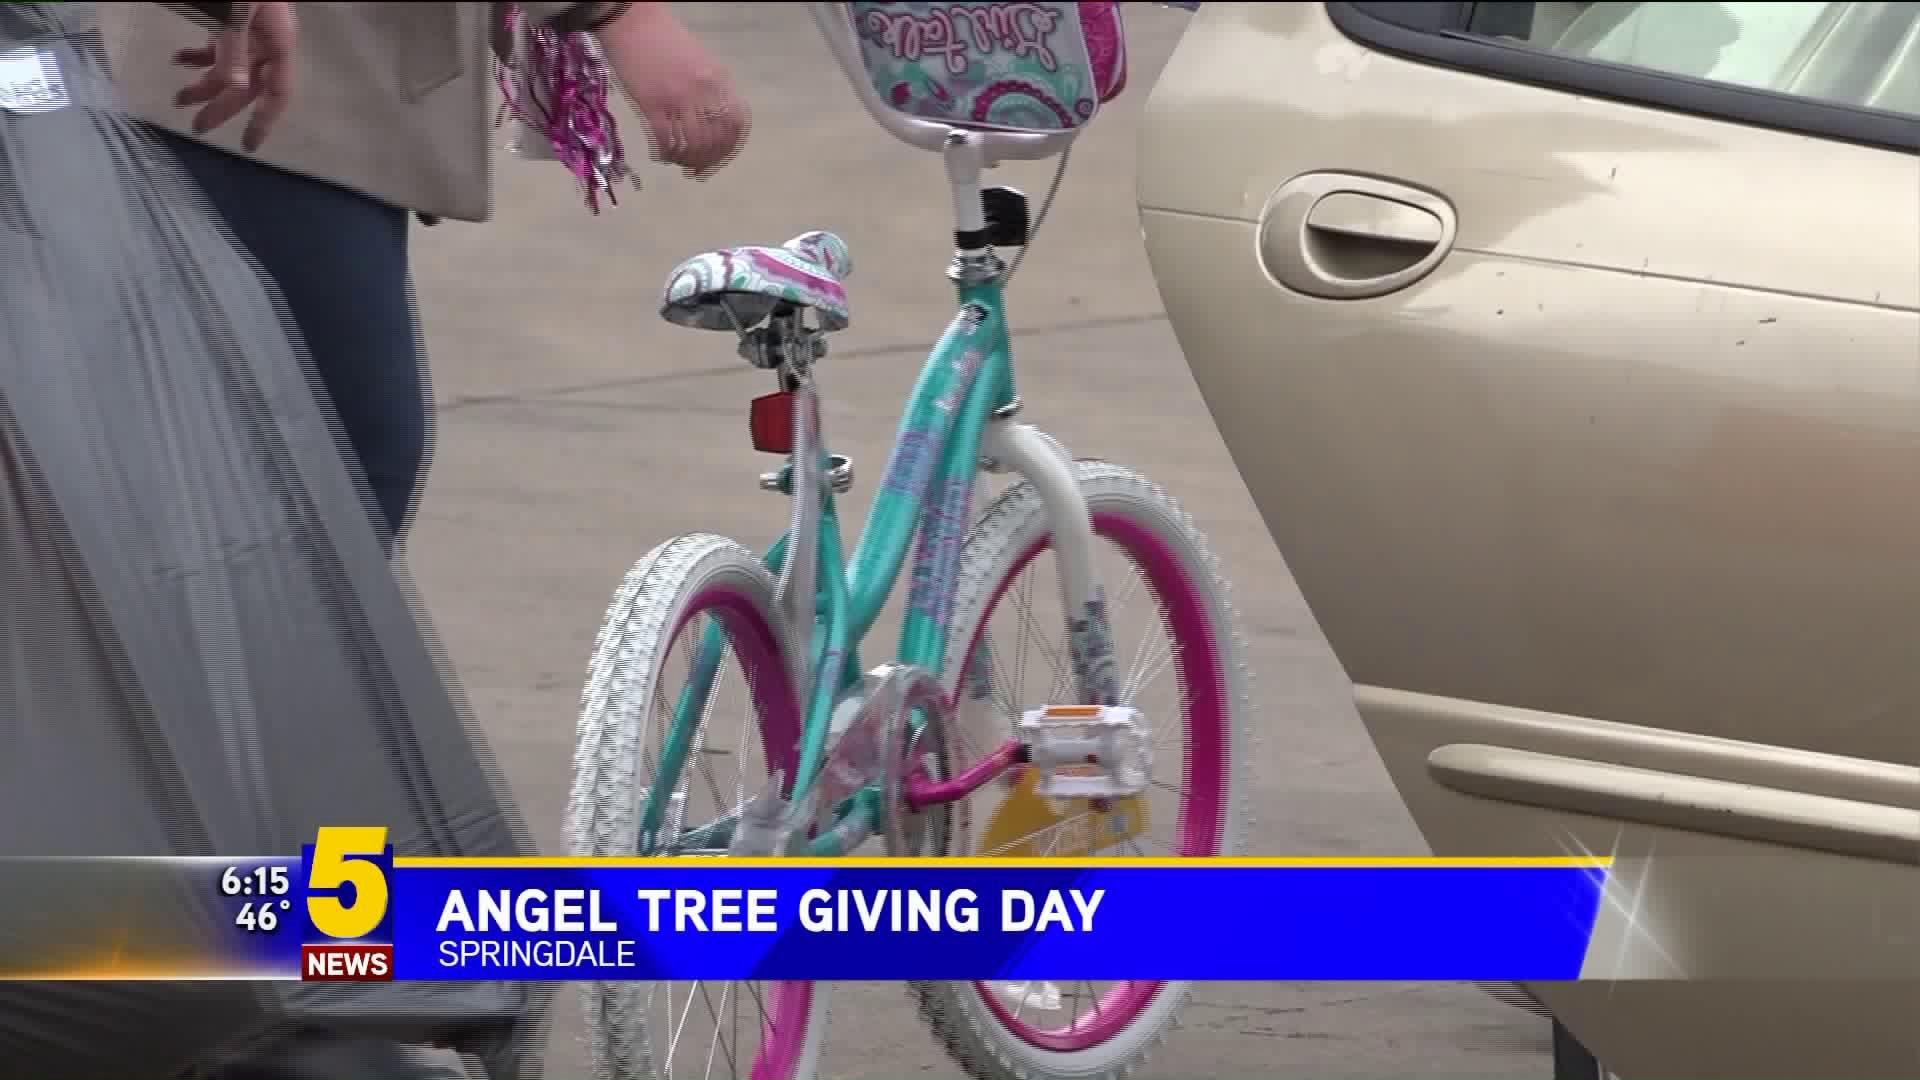 Angel Tree Giving Day